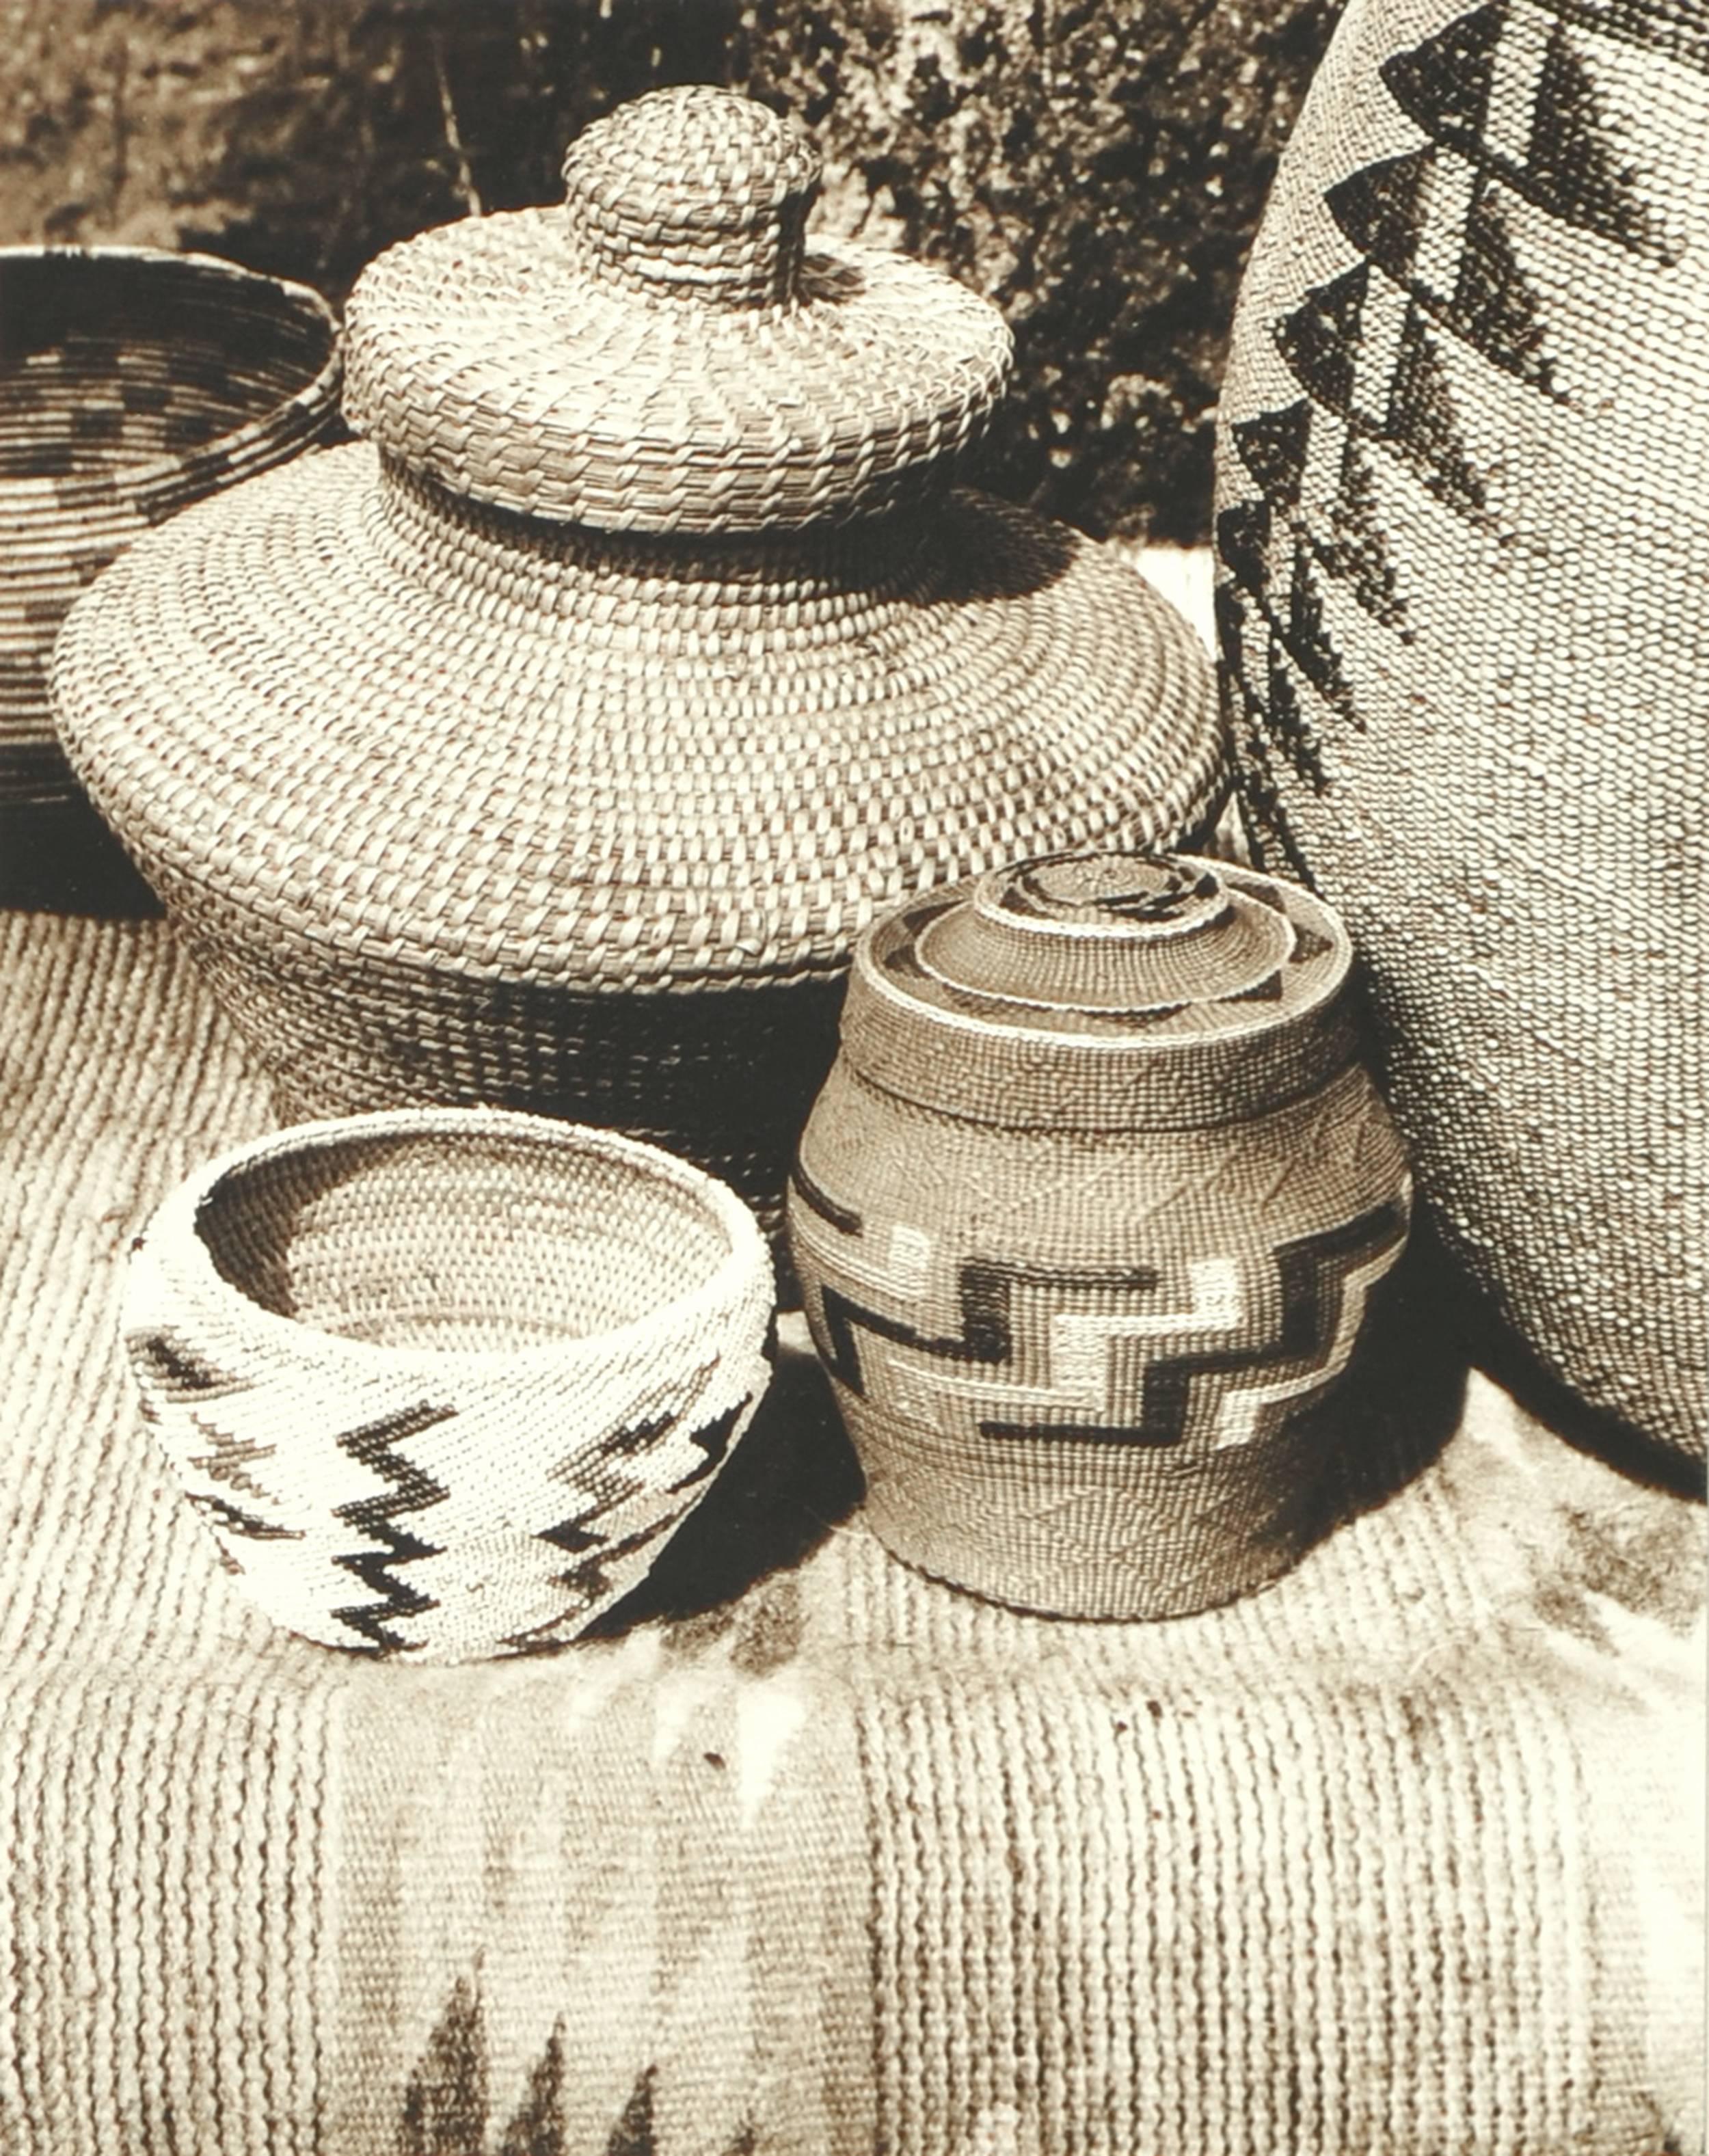 Indian Baskets - Set of 3 photographs

A set of three beautiful sepia tone photographs of Indian baskets by Nancy Maynard (American, 20th Century). Each of these photos highlights a different set of baskets, showing their delicate and complex